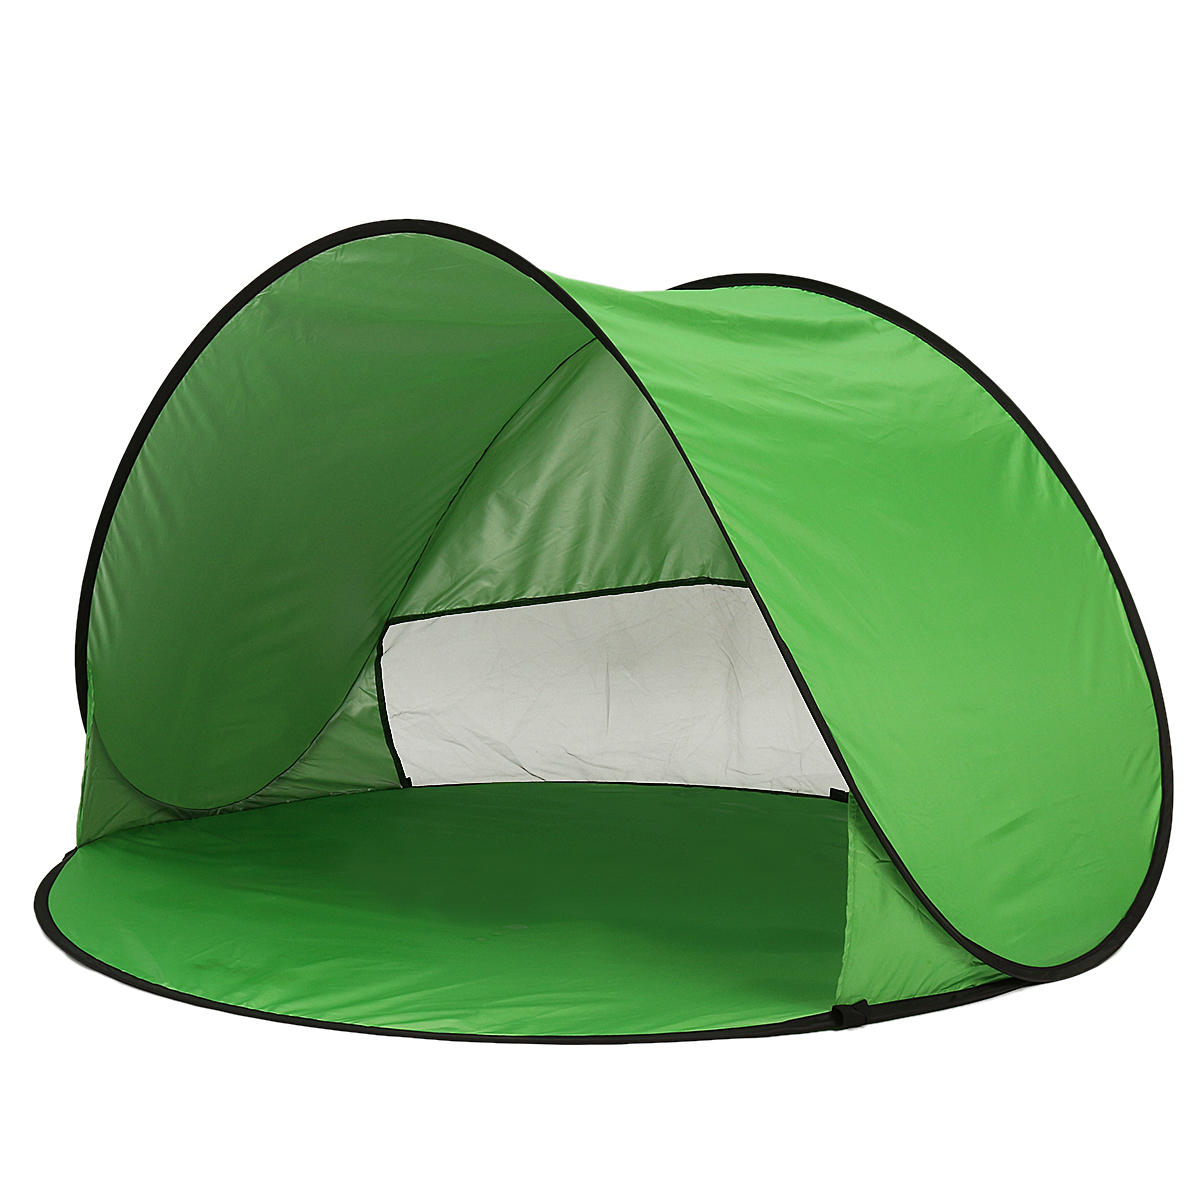 Outdoor 1-2 Person Camping Tent Automatic Opening UV Beach Sunshade Canopy